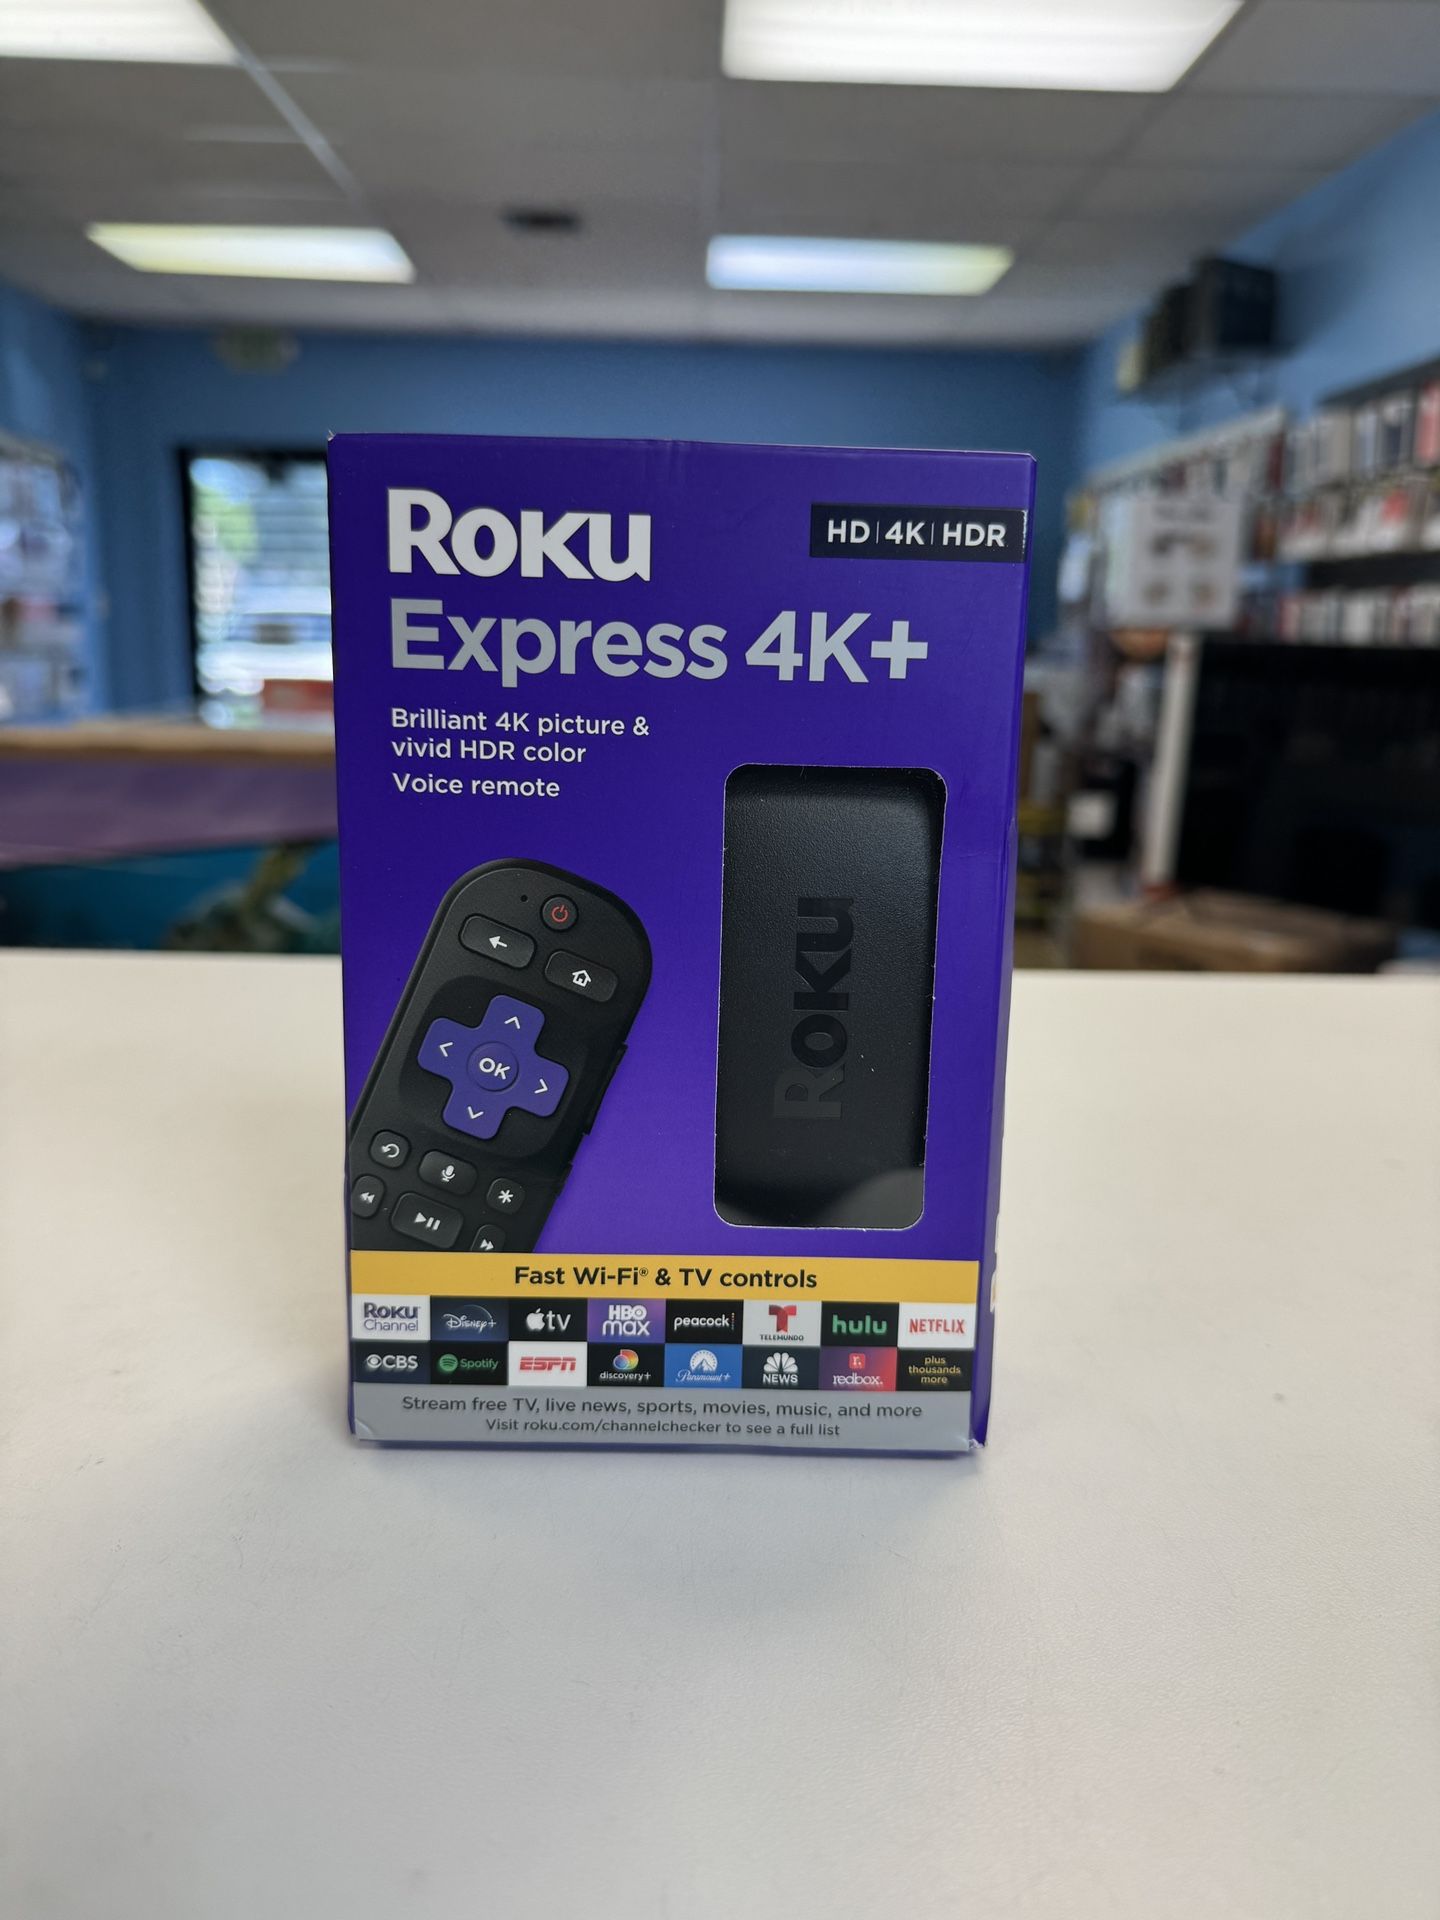 Roku Express 4K+ | Streaming Player HD/4K/HDR with Roku Voice Remote and control